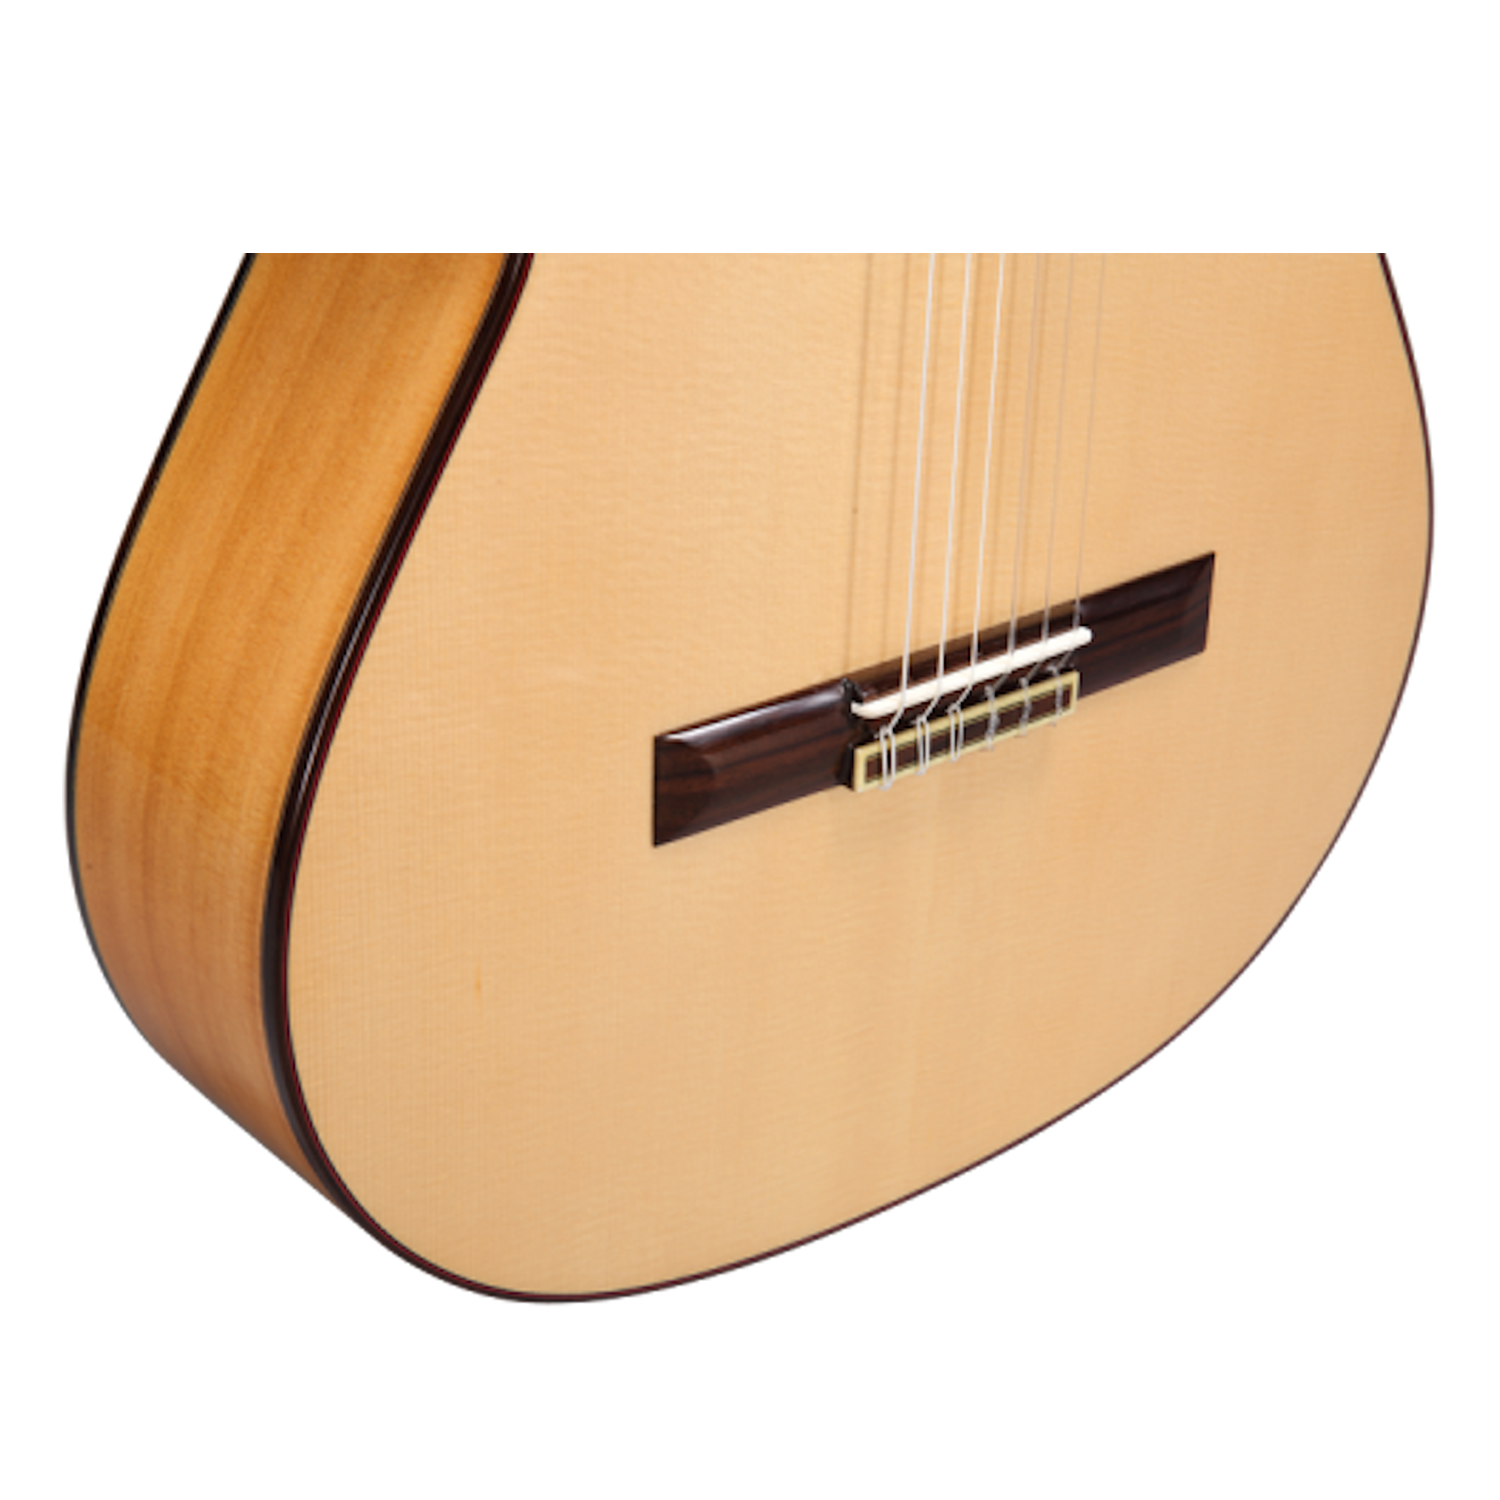 Altamira N700F Flamenco Guitar French Polished Solid Spruce Top/Solid Cypress Back & Sides w/Case